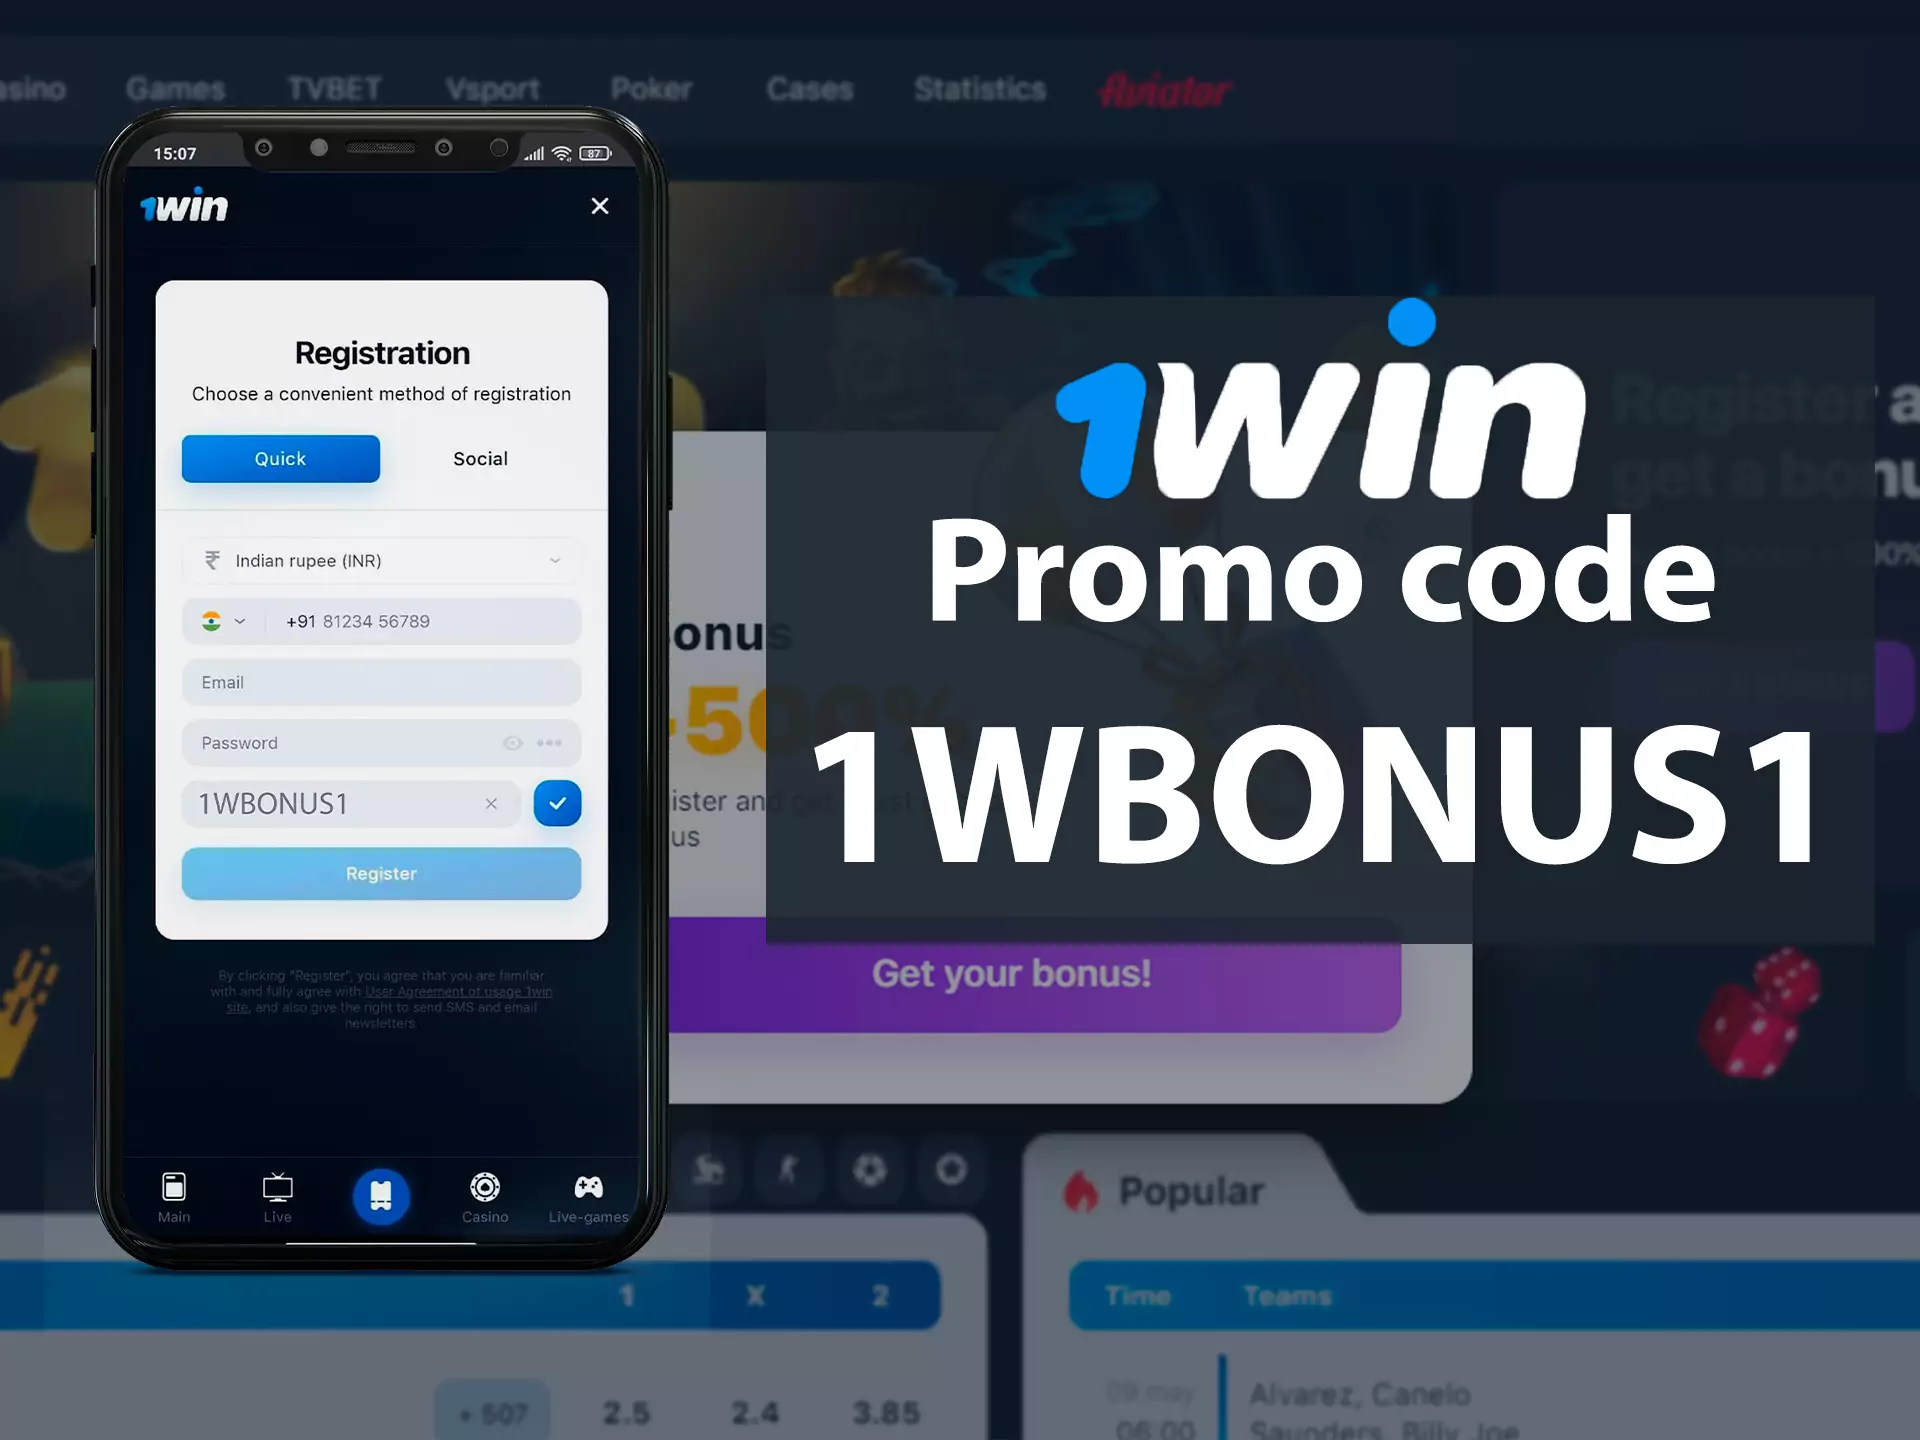 First 50 our readers can get another 5% bonus with our 1WBONUS1 promo code.